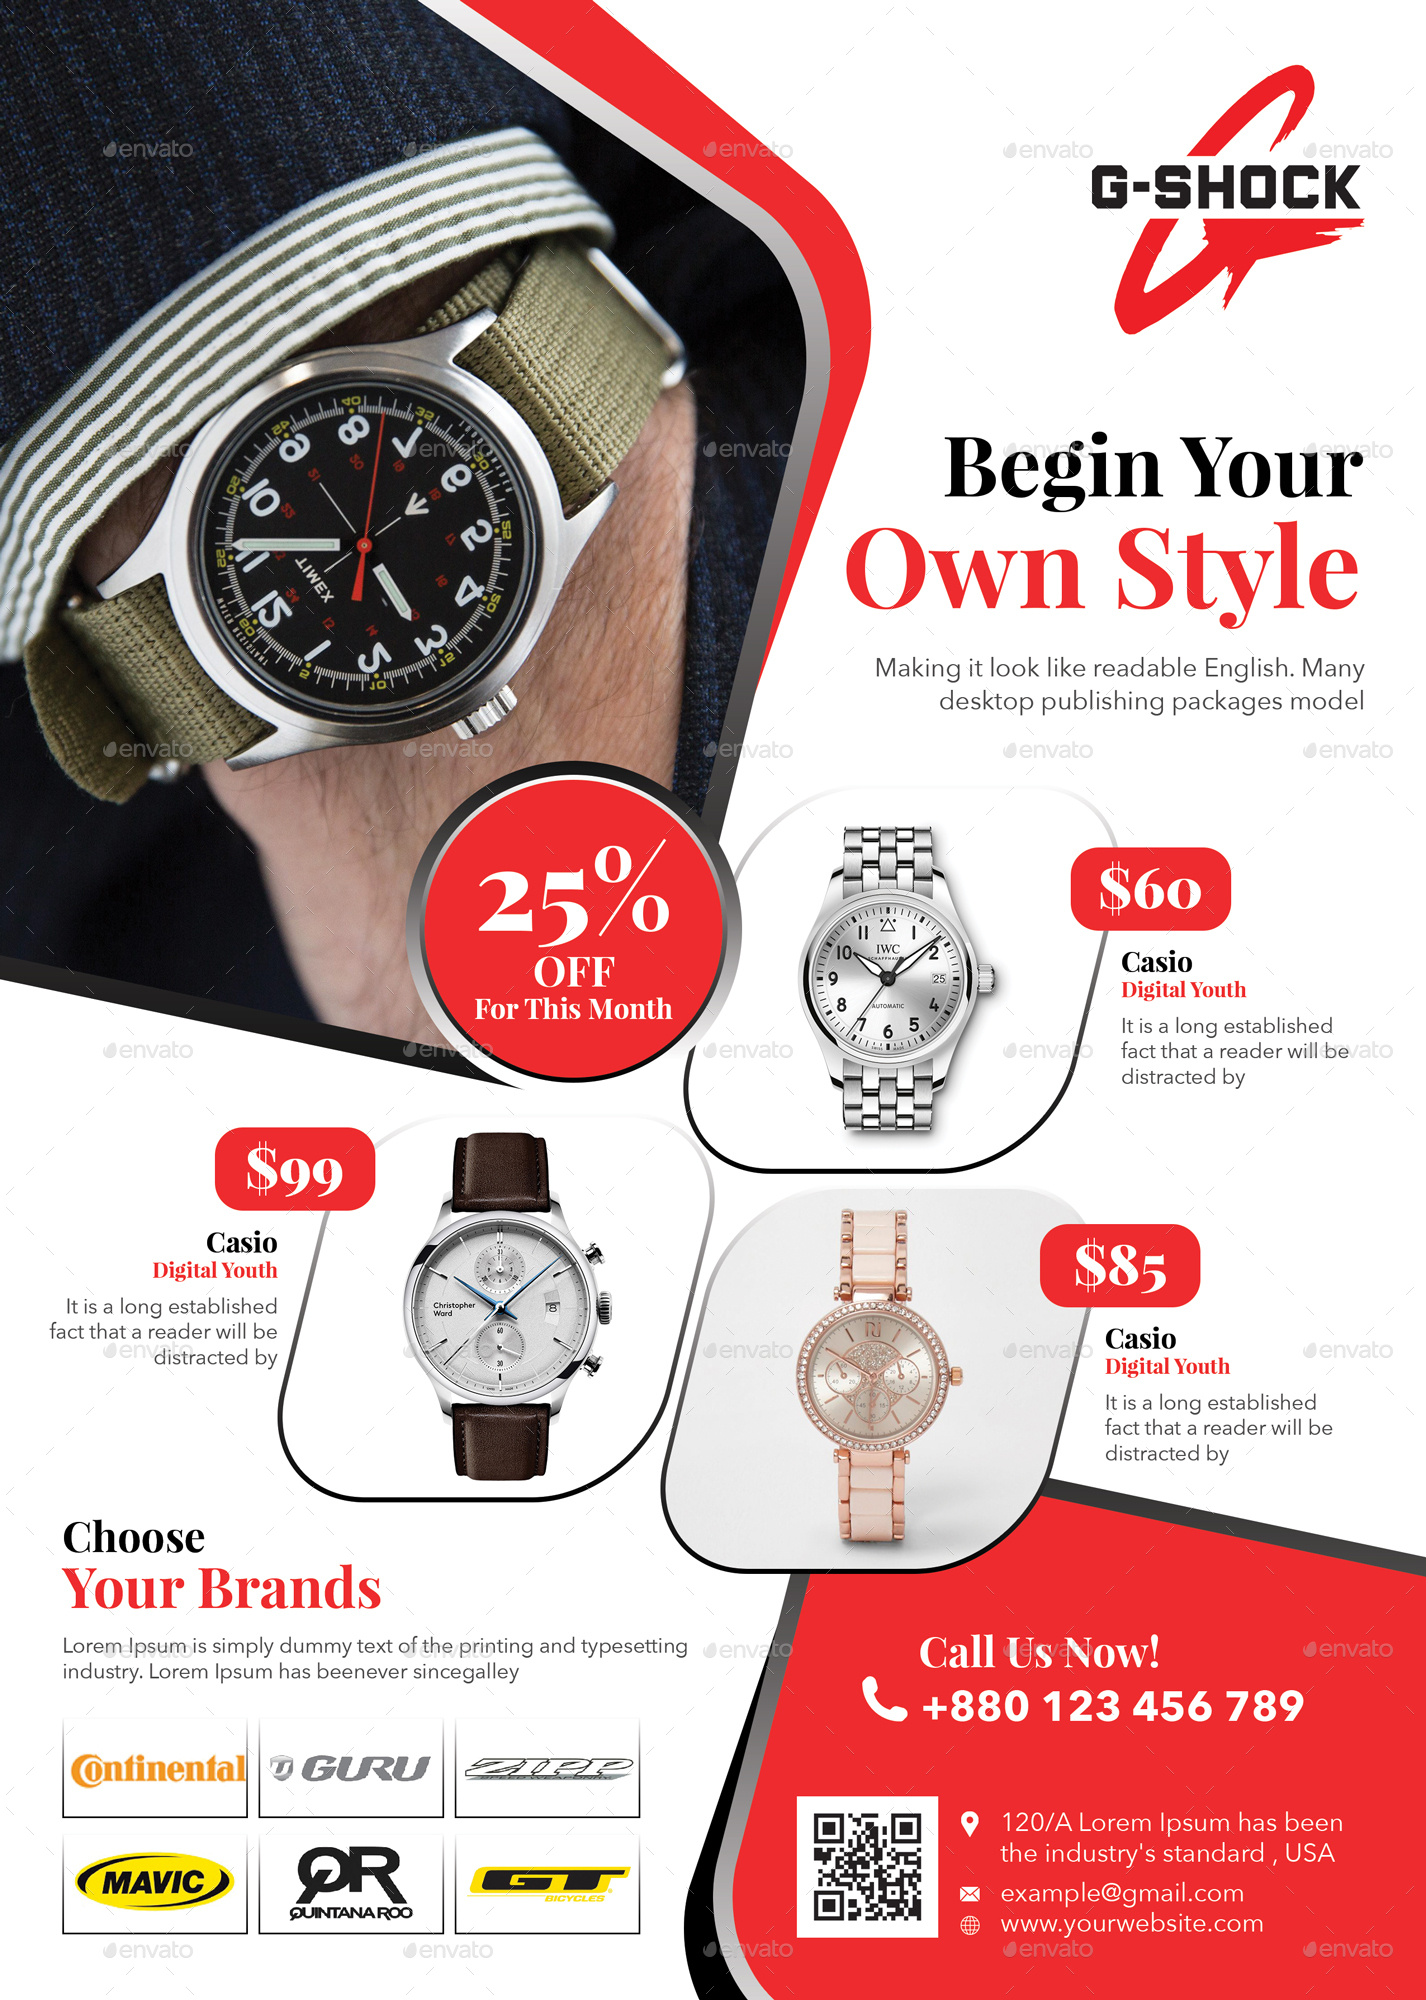 Watch Product Promotional Flyer